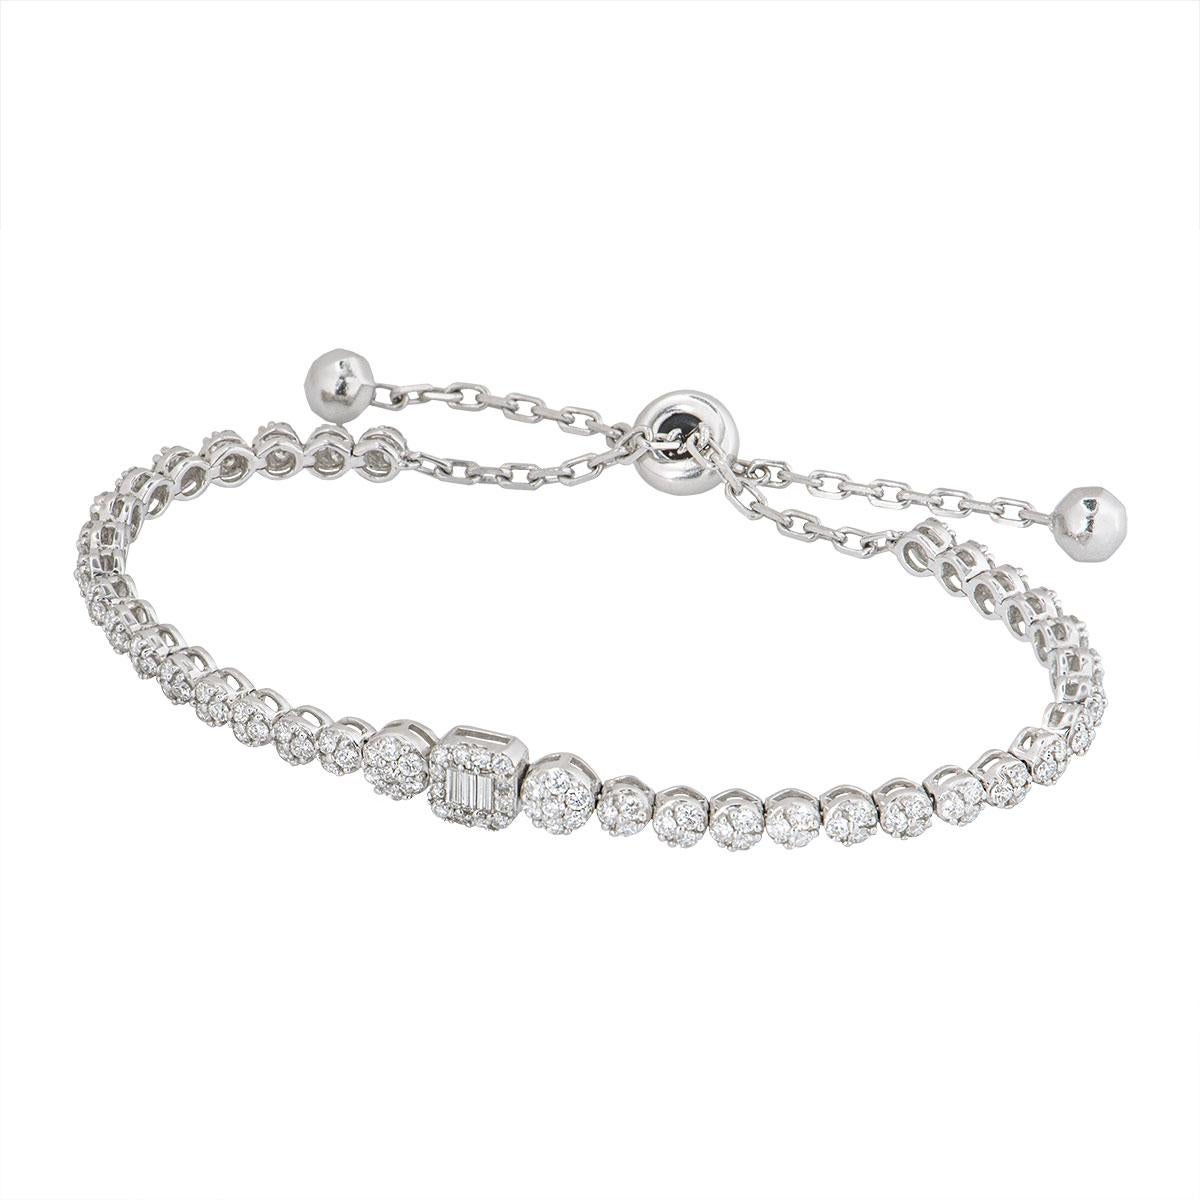 An 18k white gold illusion set diamond line bracelet. The bracelet is set with 128 round brilliant cut diamonds in circular motifs with 3 baguette diamonds in the centre motif. The round brilliant cut diamonds have an approximate weight of 0.77ct